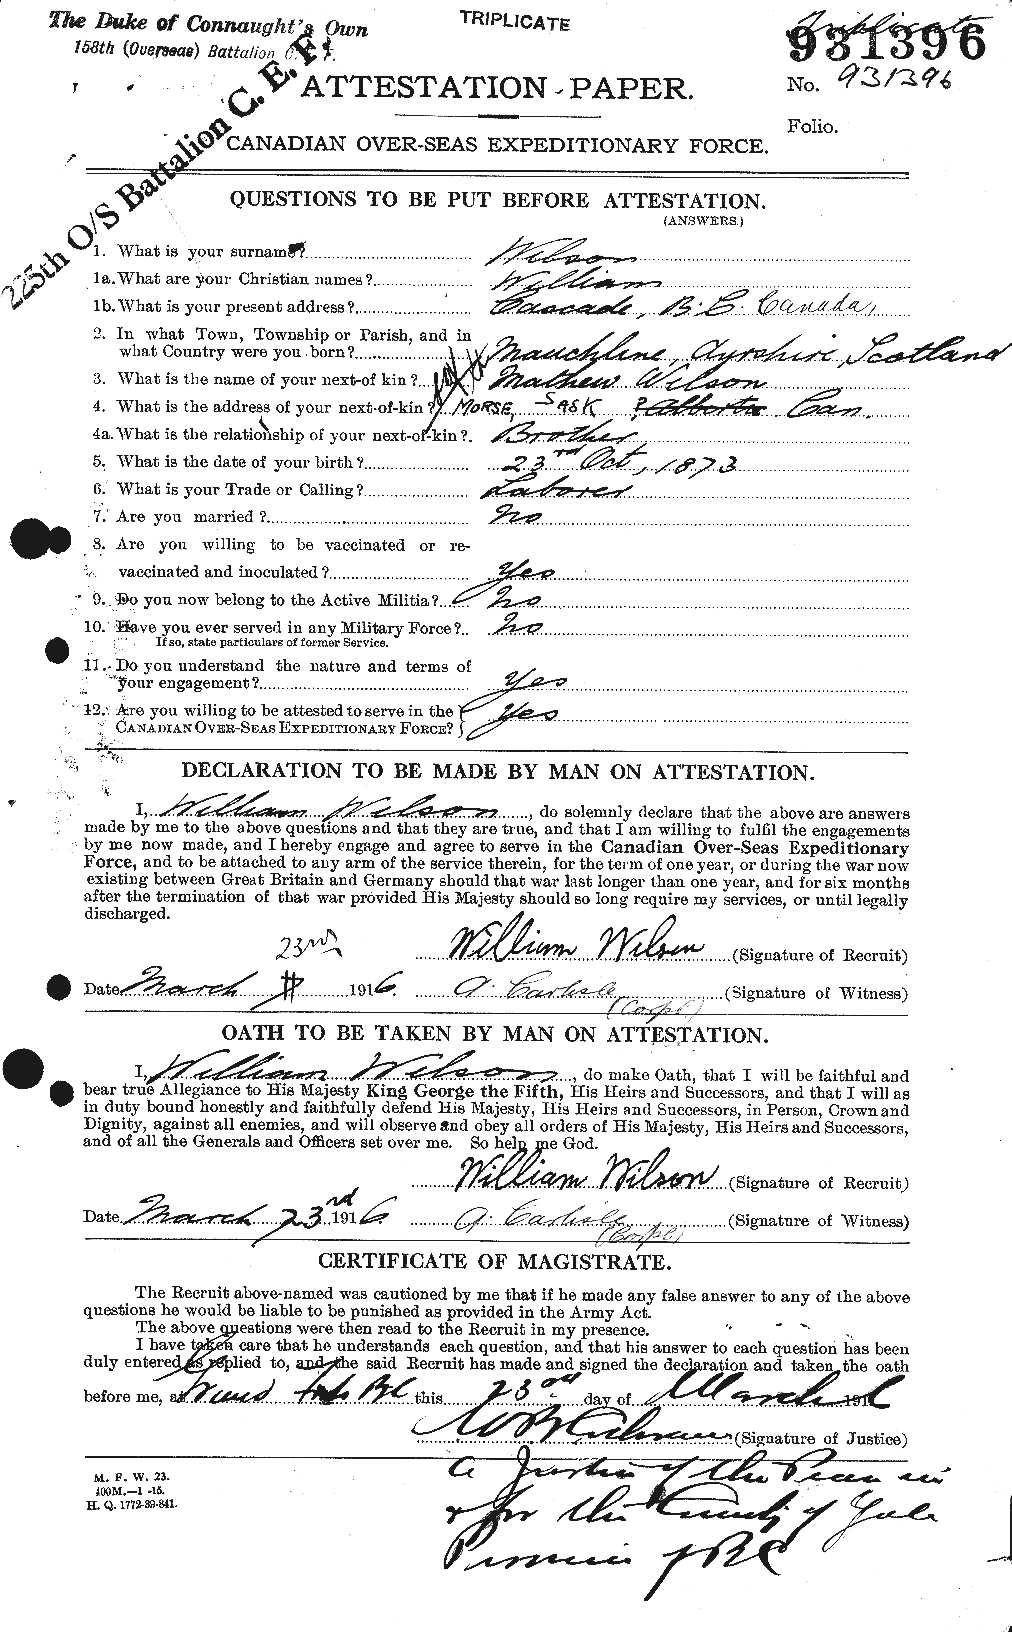 Personnel Records of the First World War - CEF 681812a